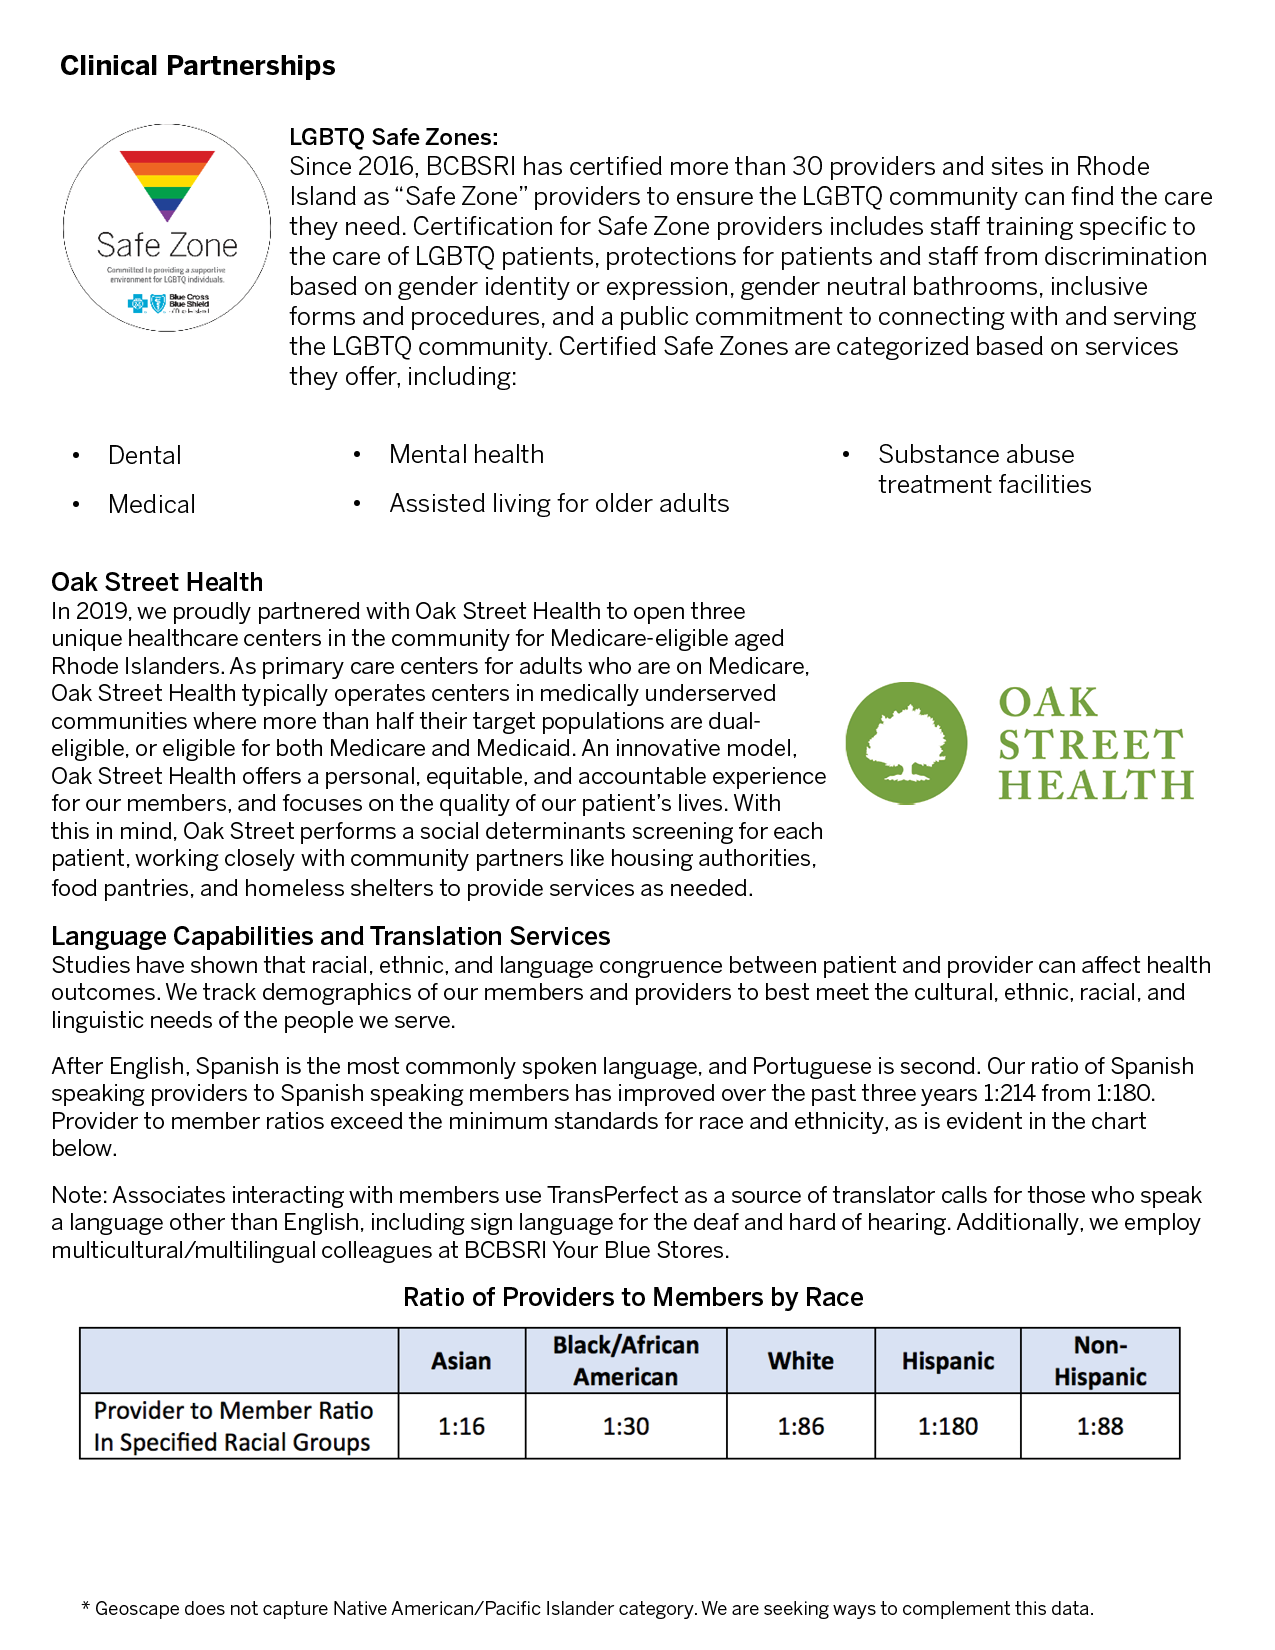 Health Equity Page 4